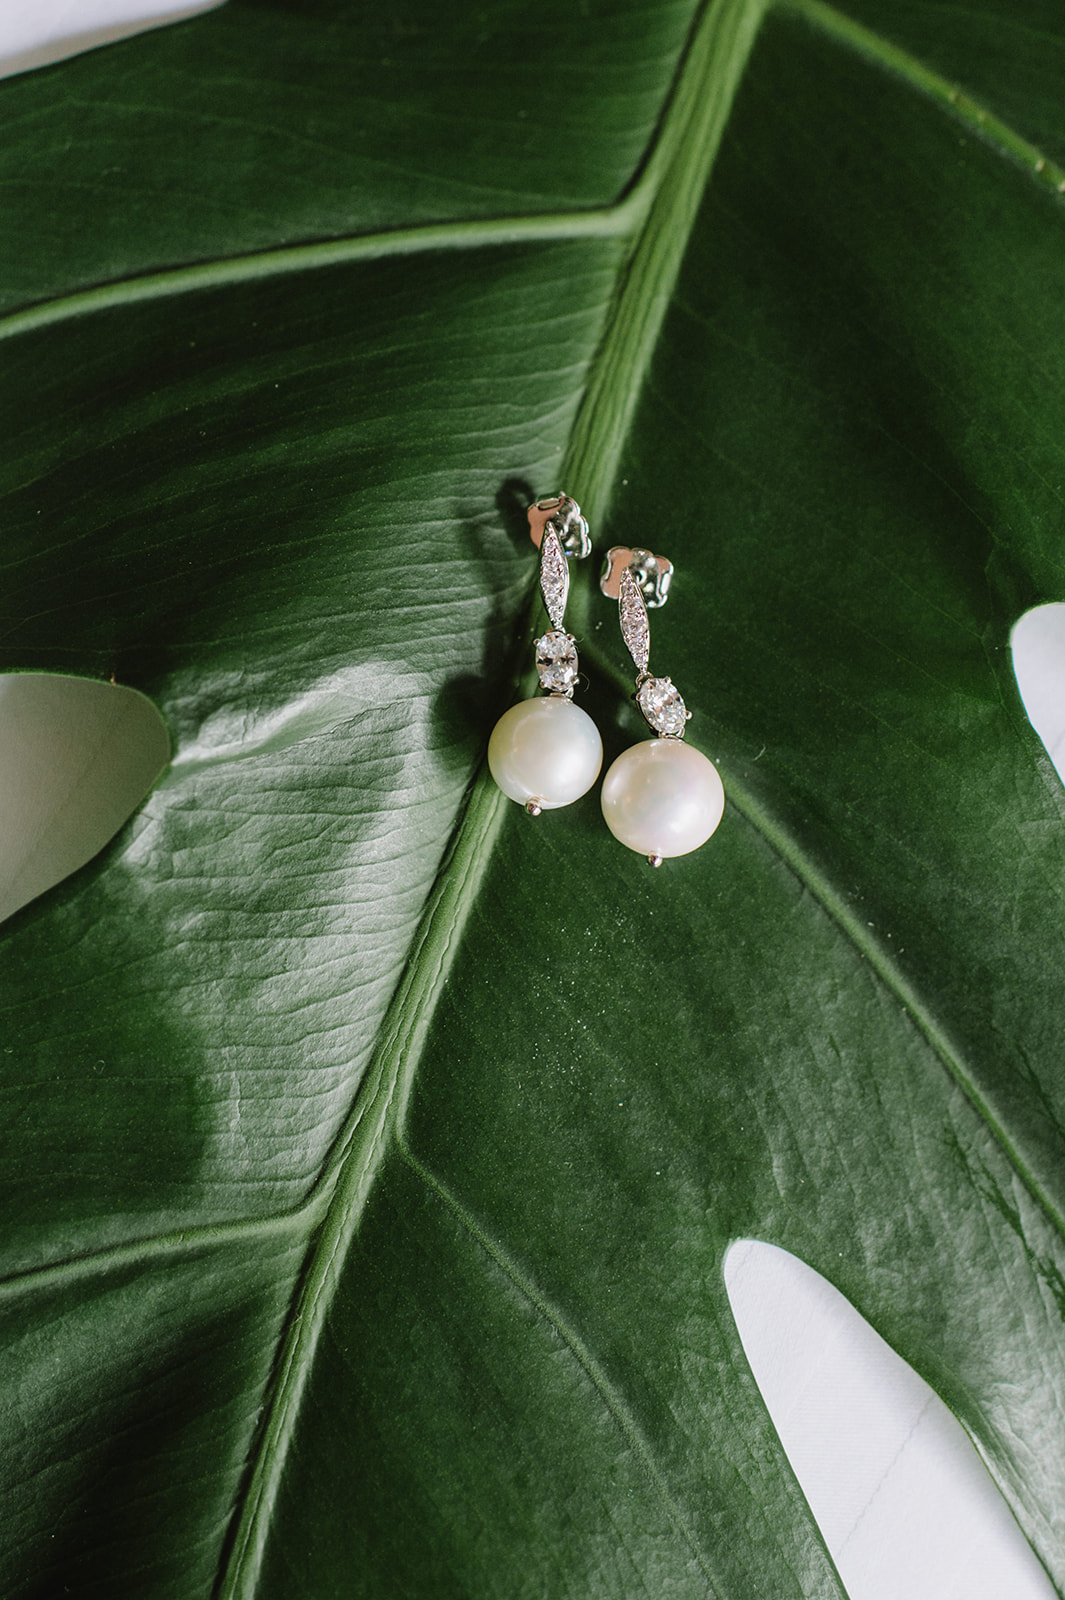 Elegant pearl earrings with leaves from Kualoa Ranch L Hewitt Photography